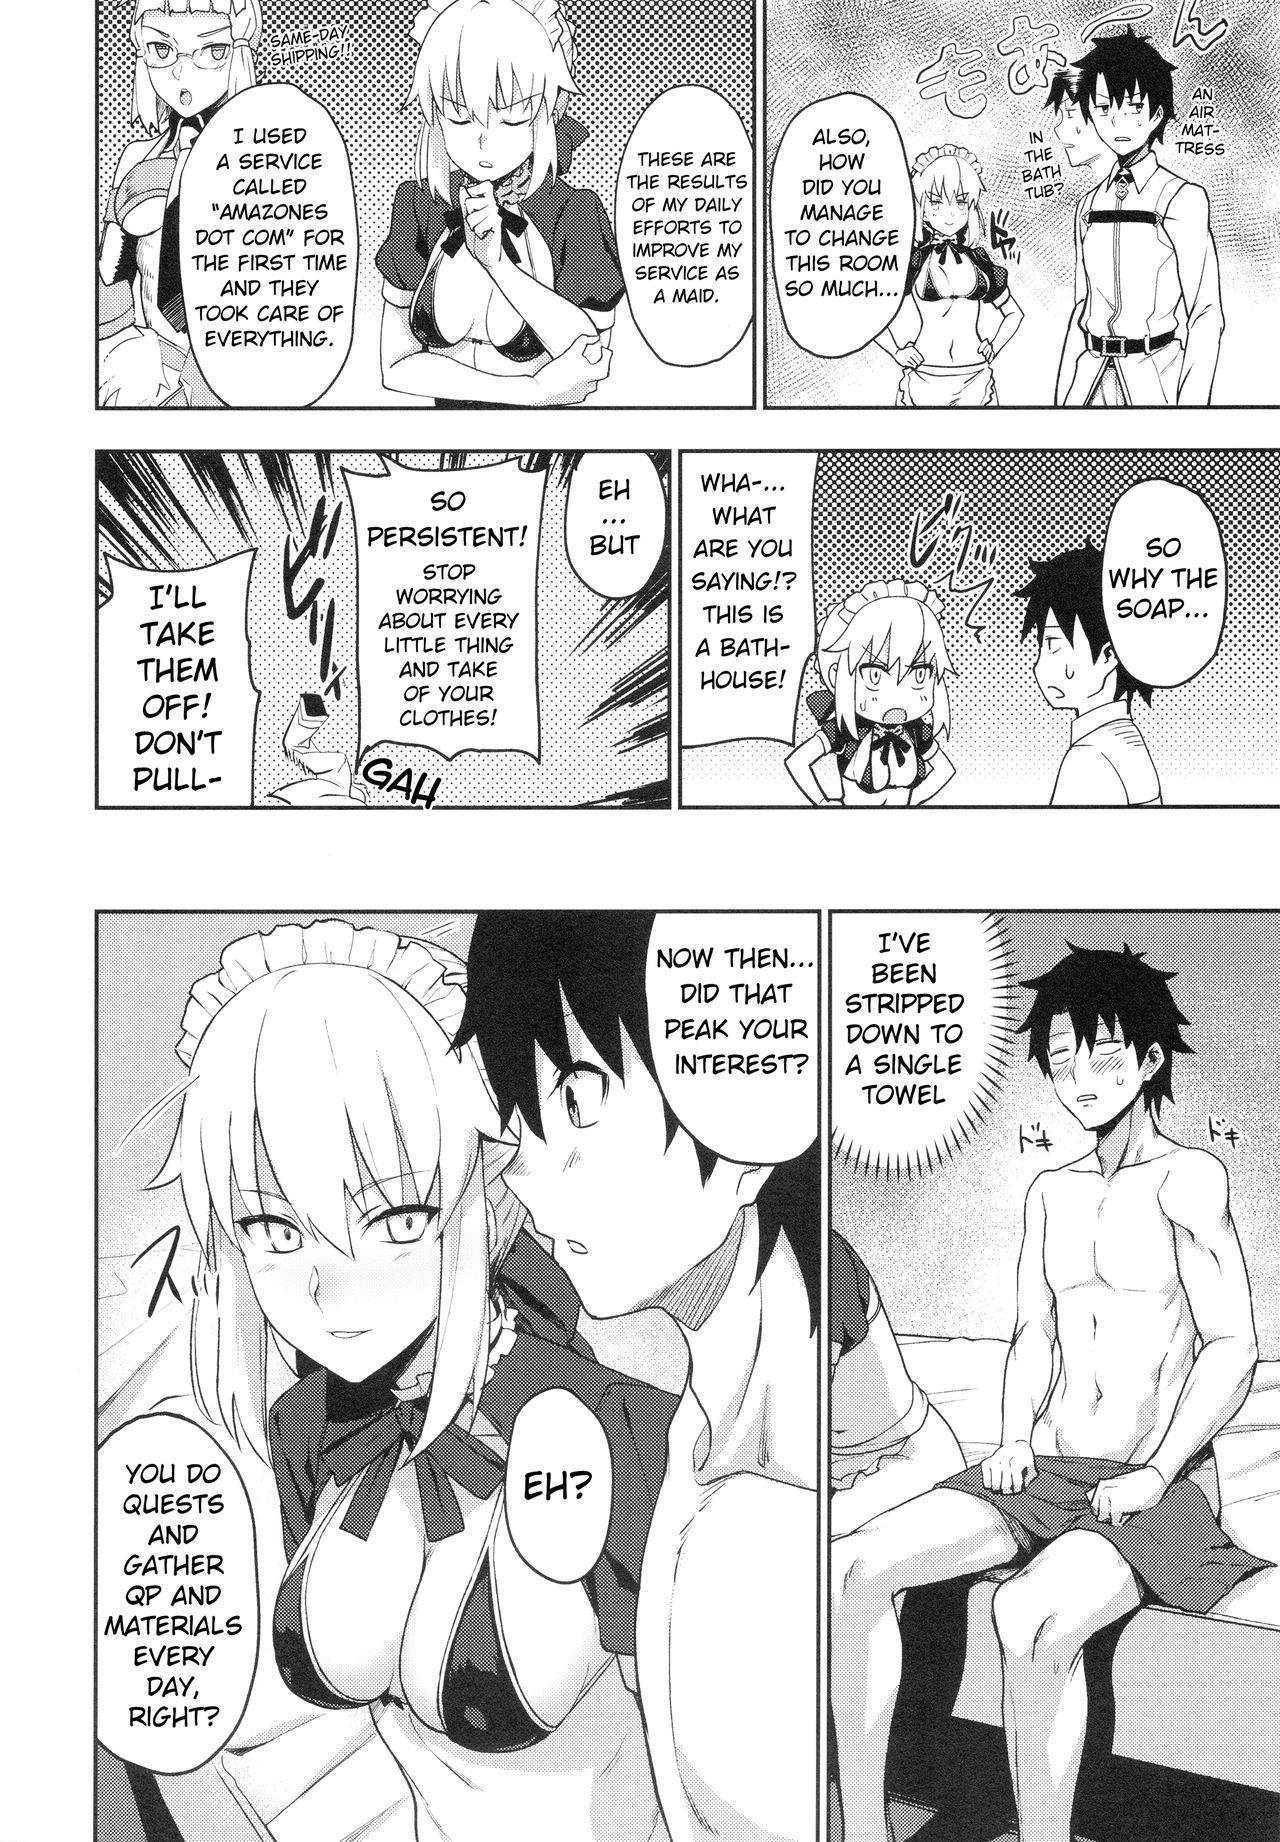 Licking Pussy Chaldea Soap SSS-kyuu Gohoushi Maid - Fate grand order Fucked Hard - Page 4